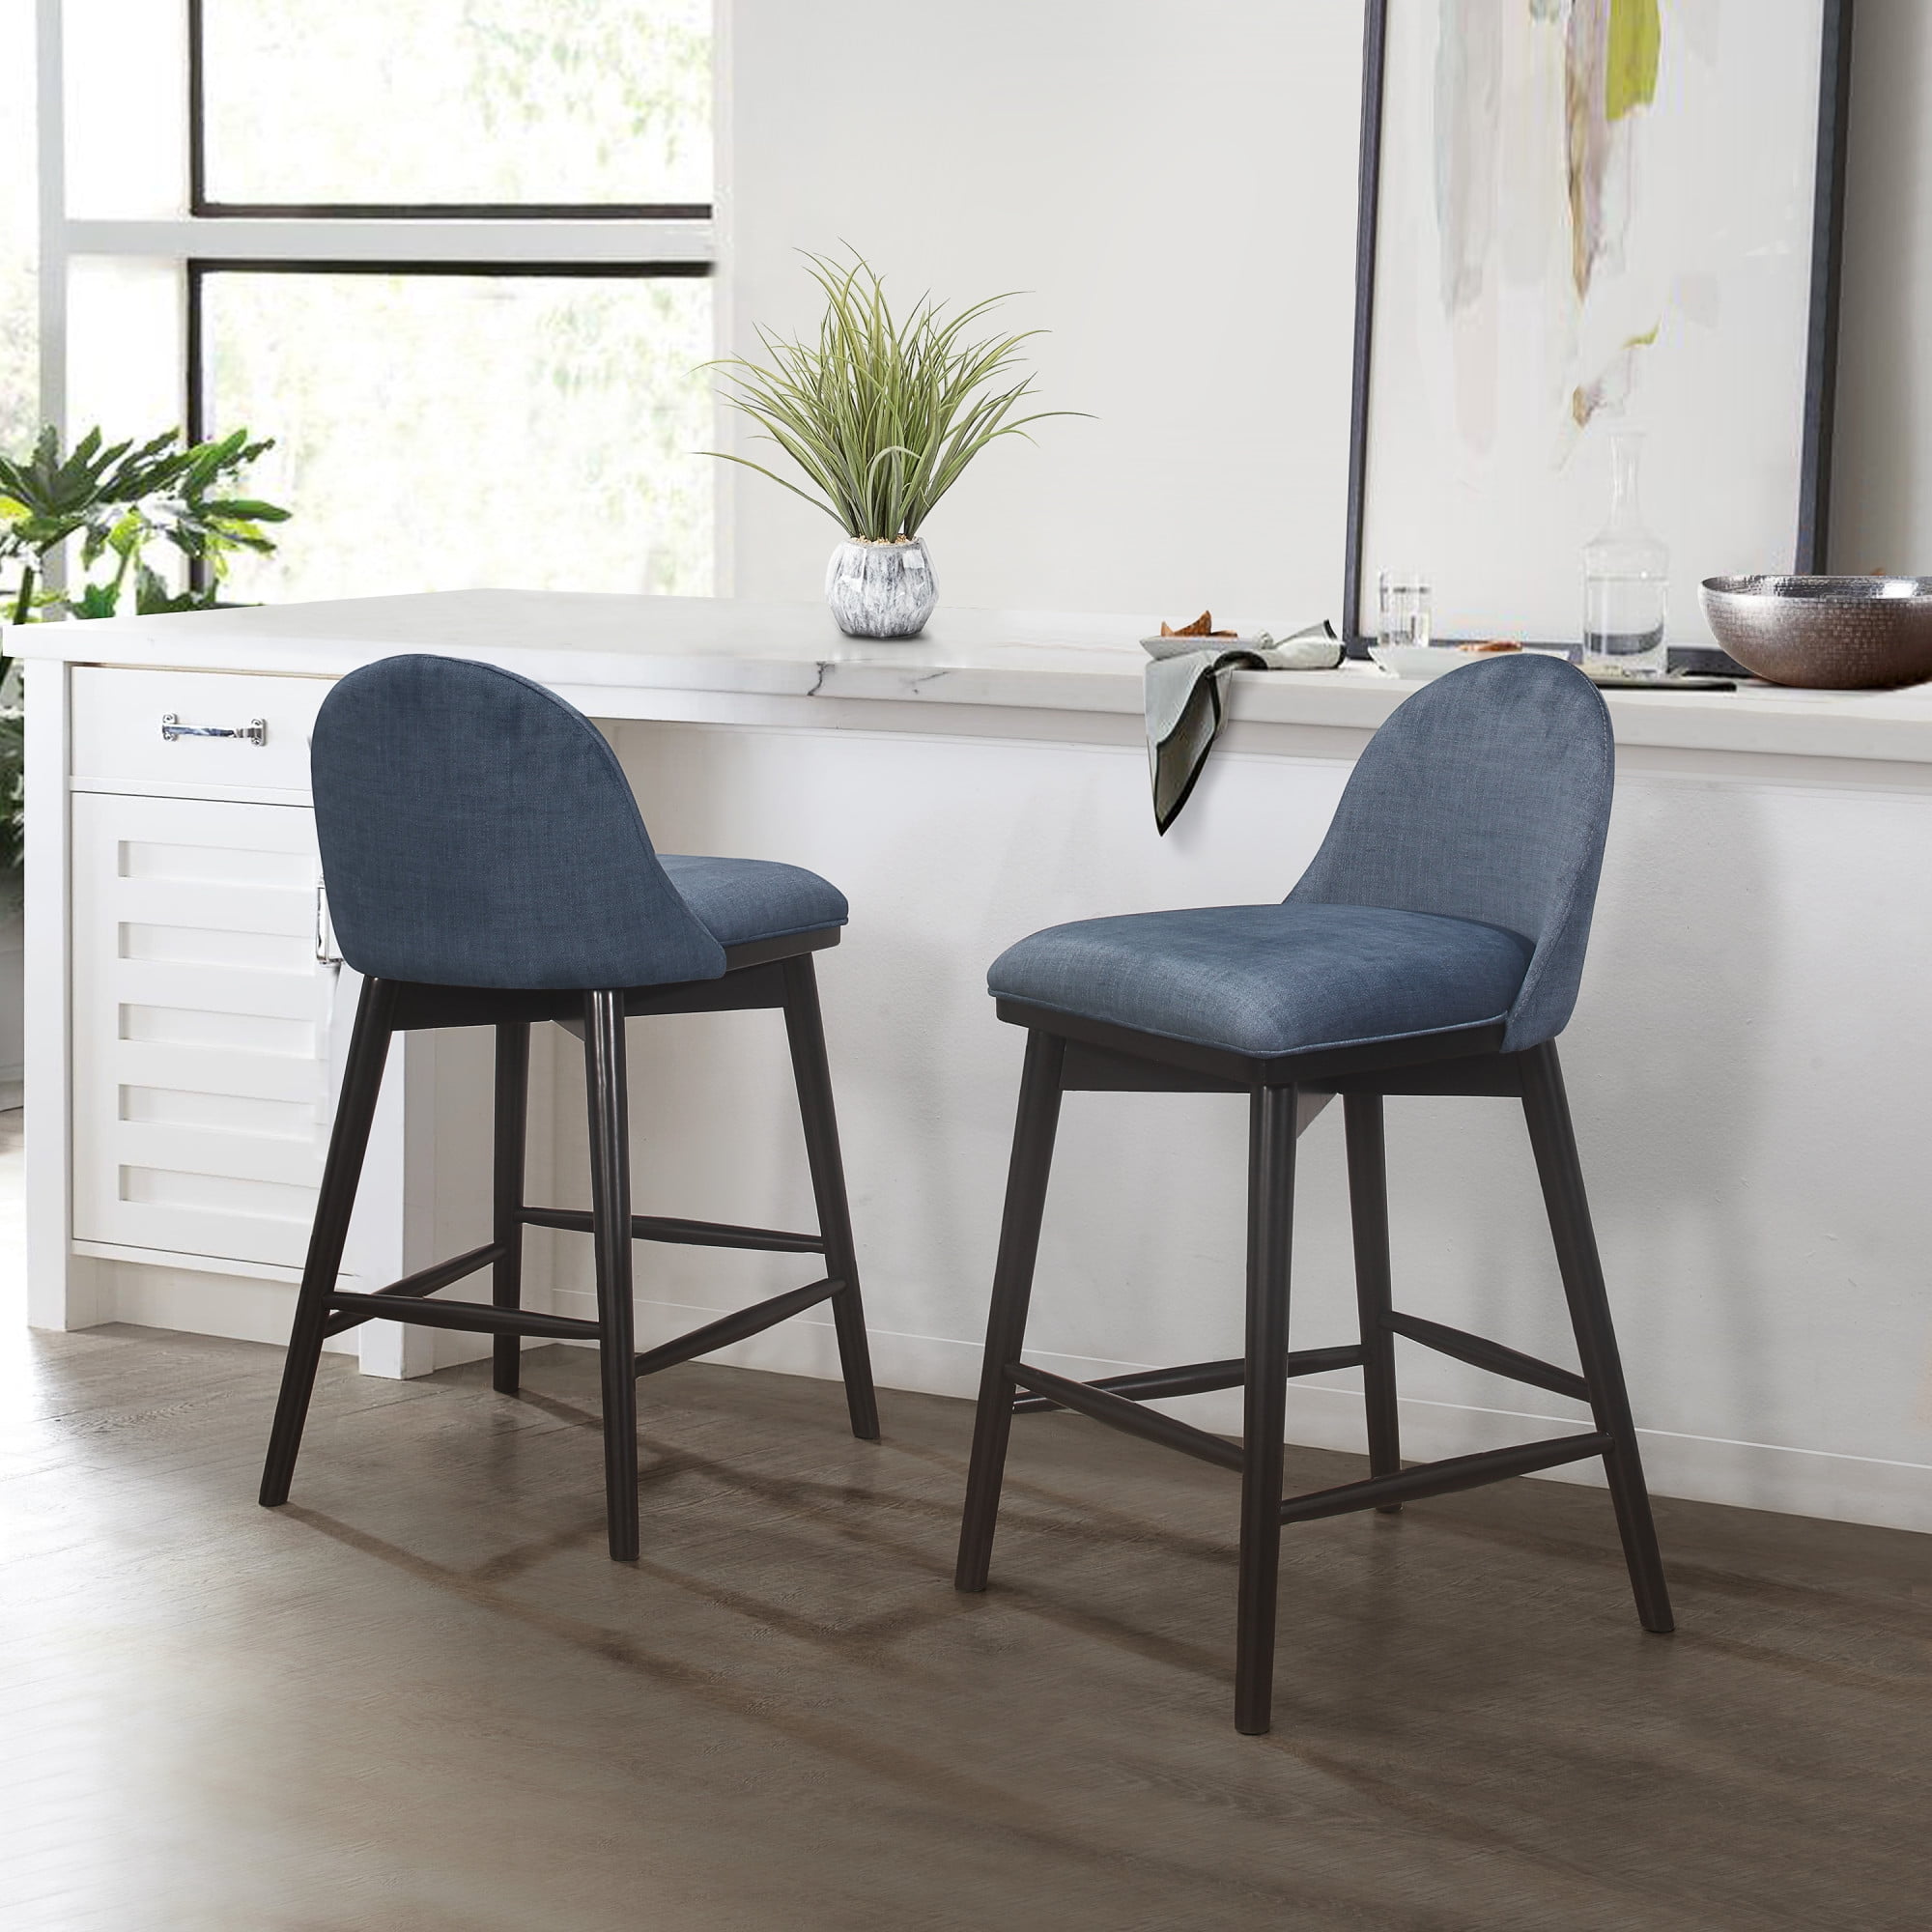 Hilale Furniture St Claire, Wooden Counter Height Stools Canada